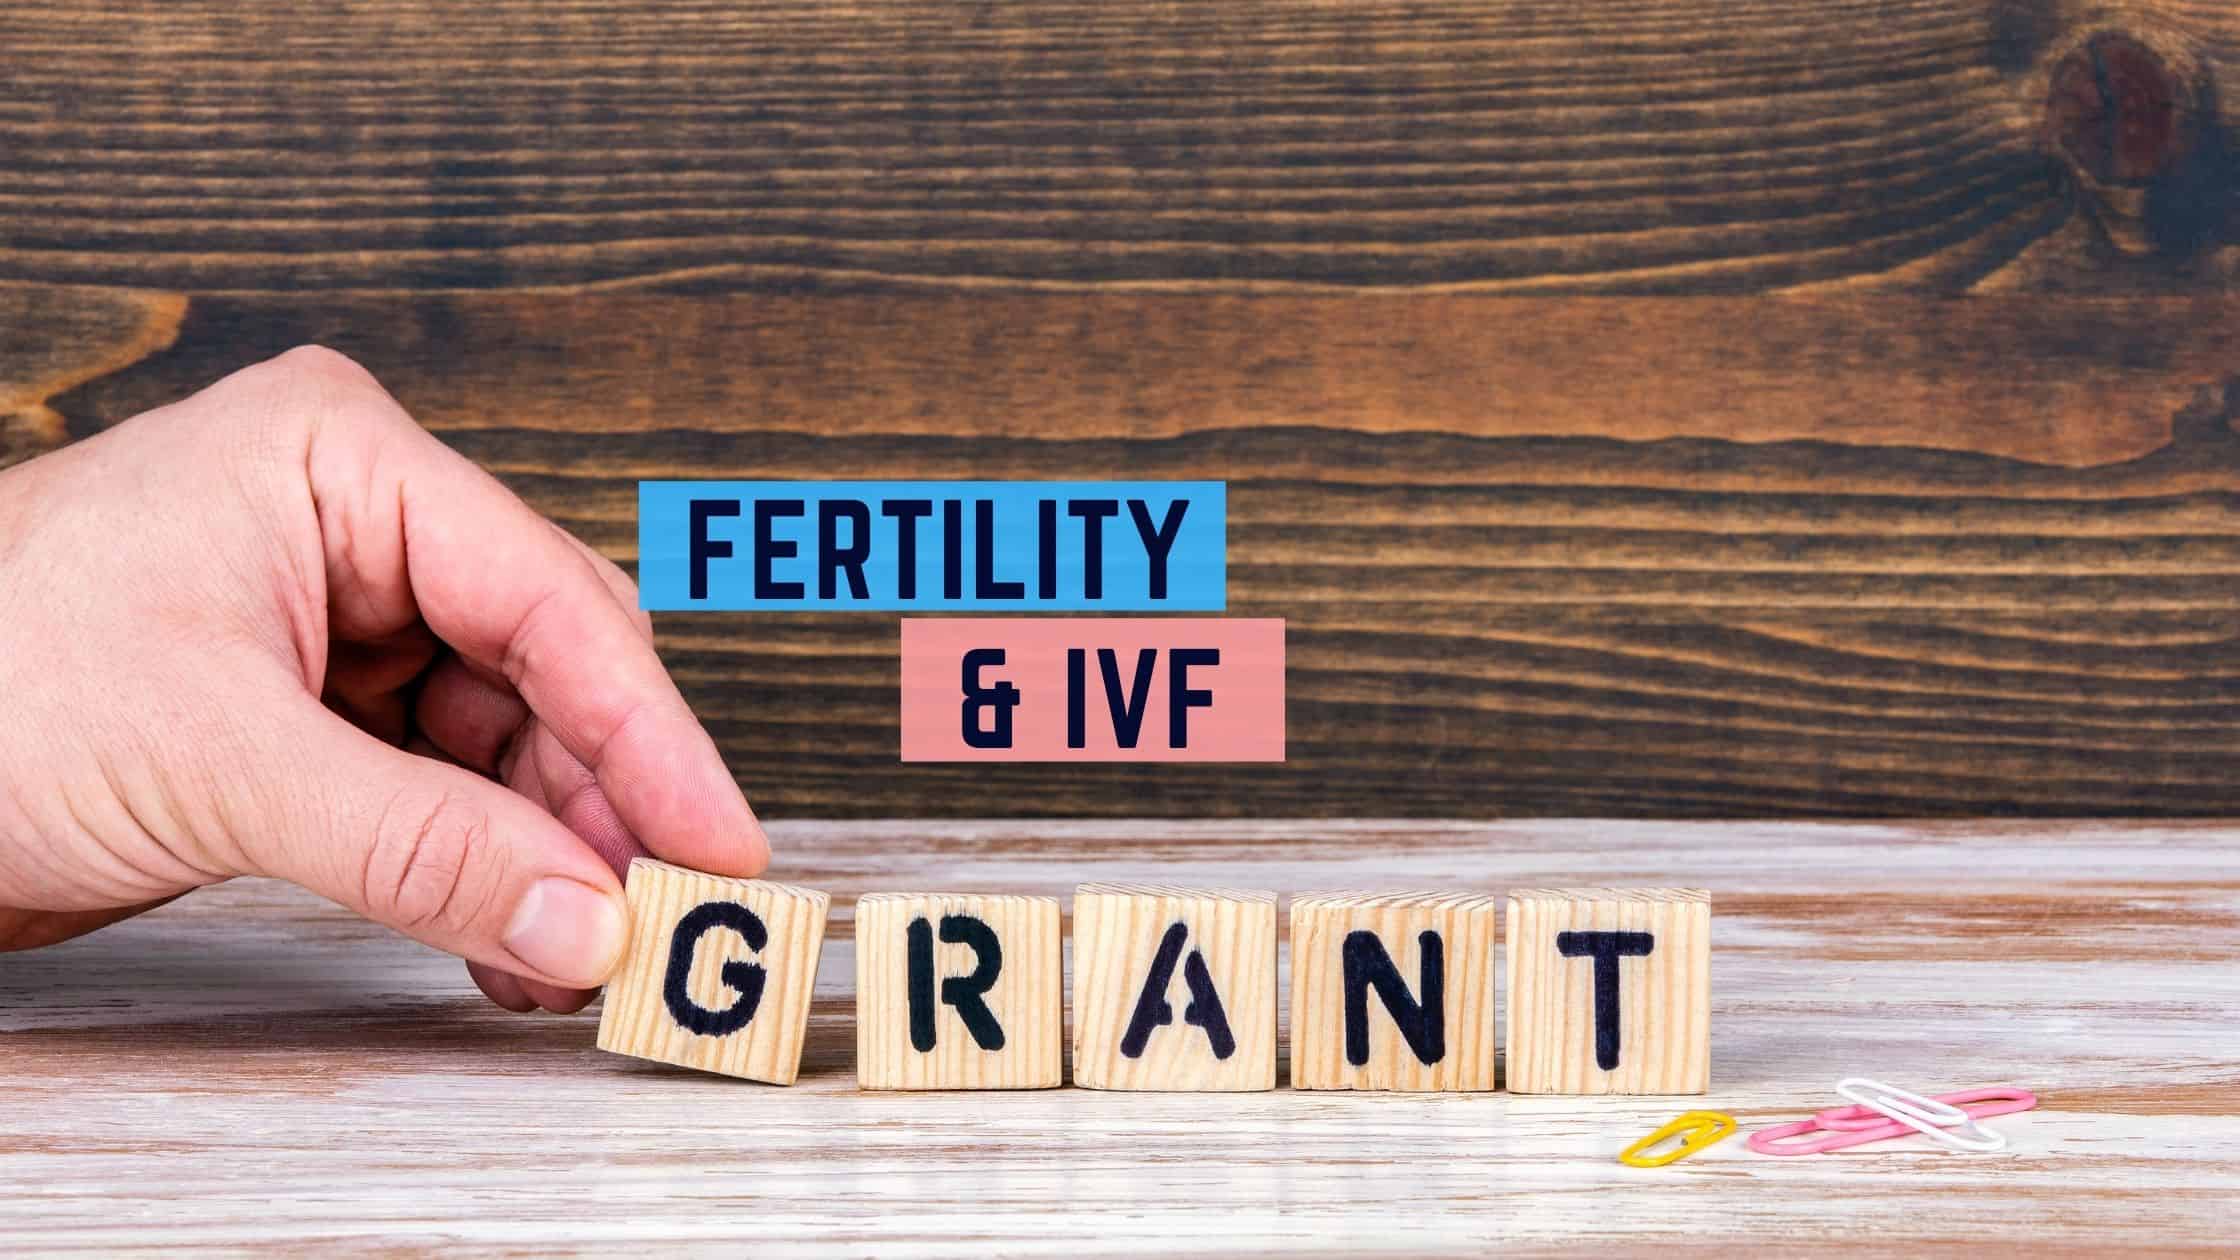 Pay for fertility treatments